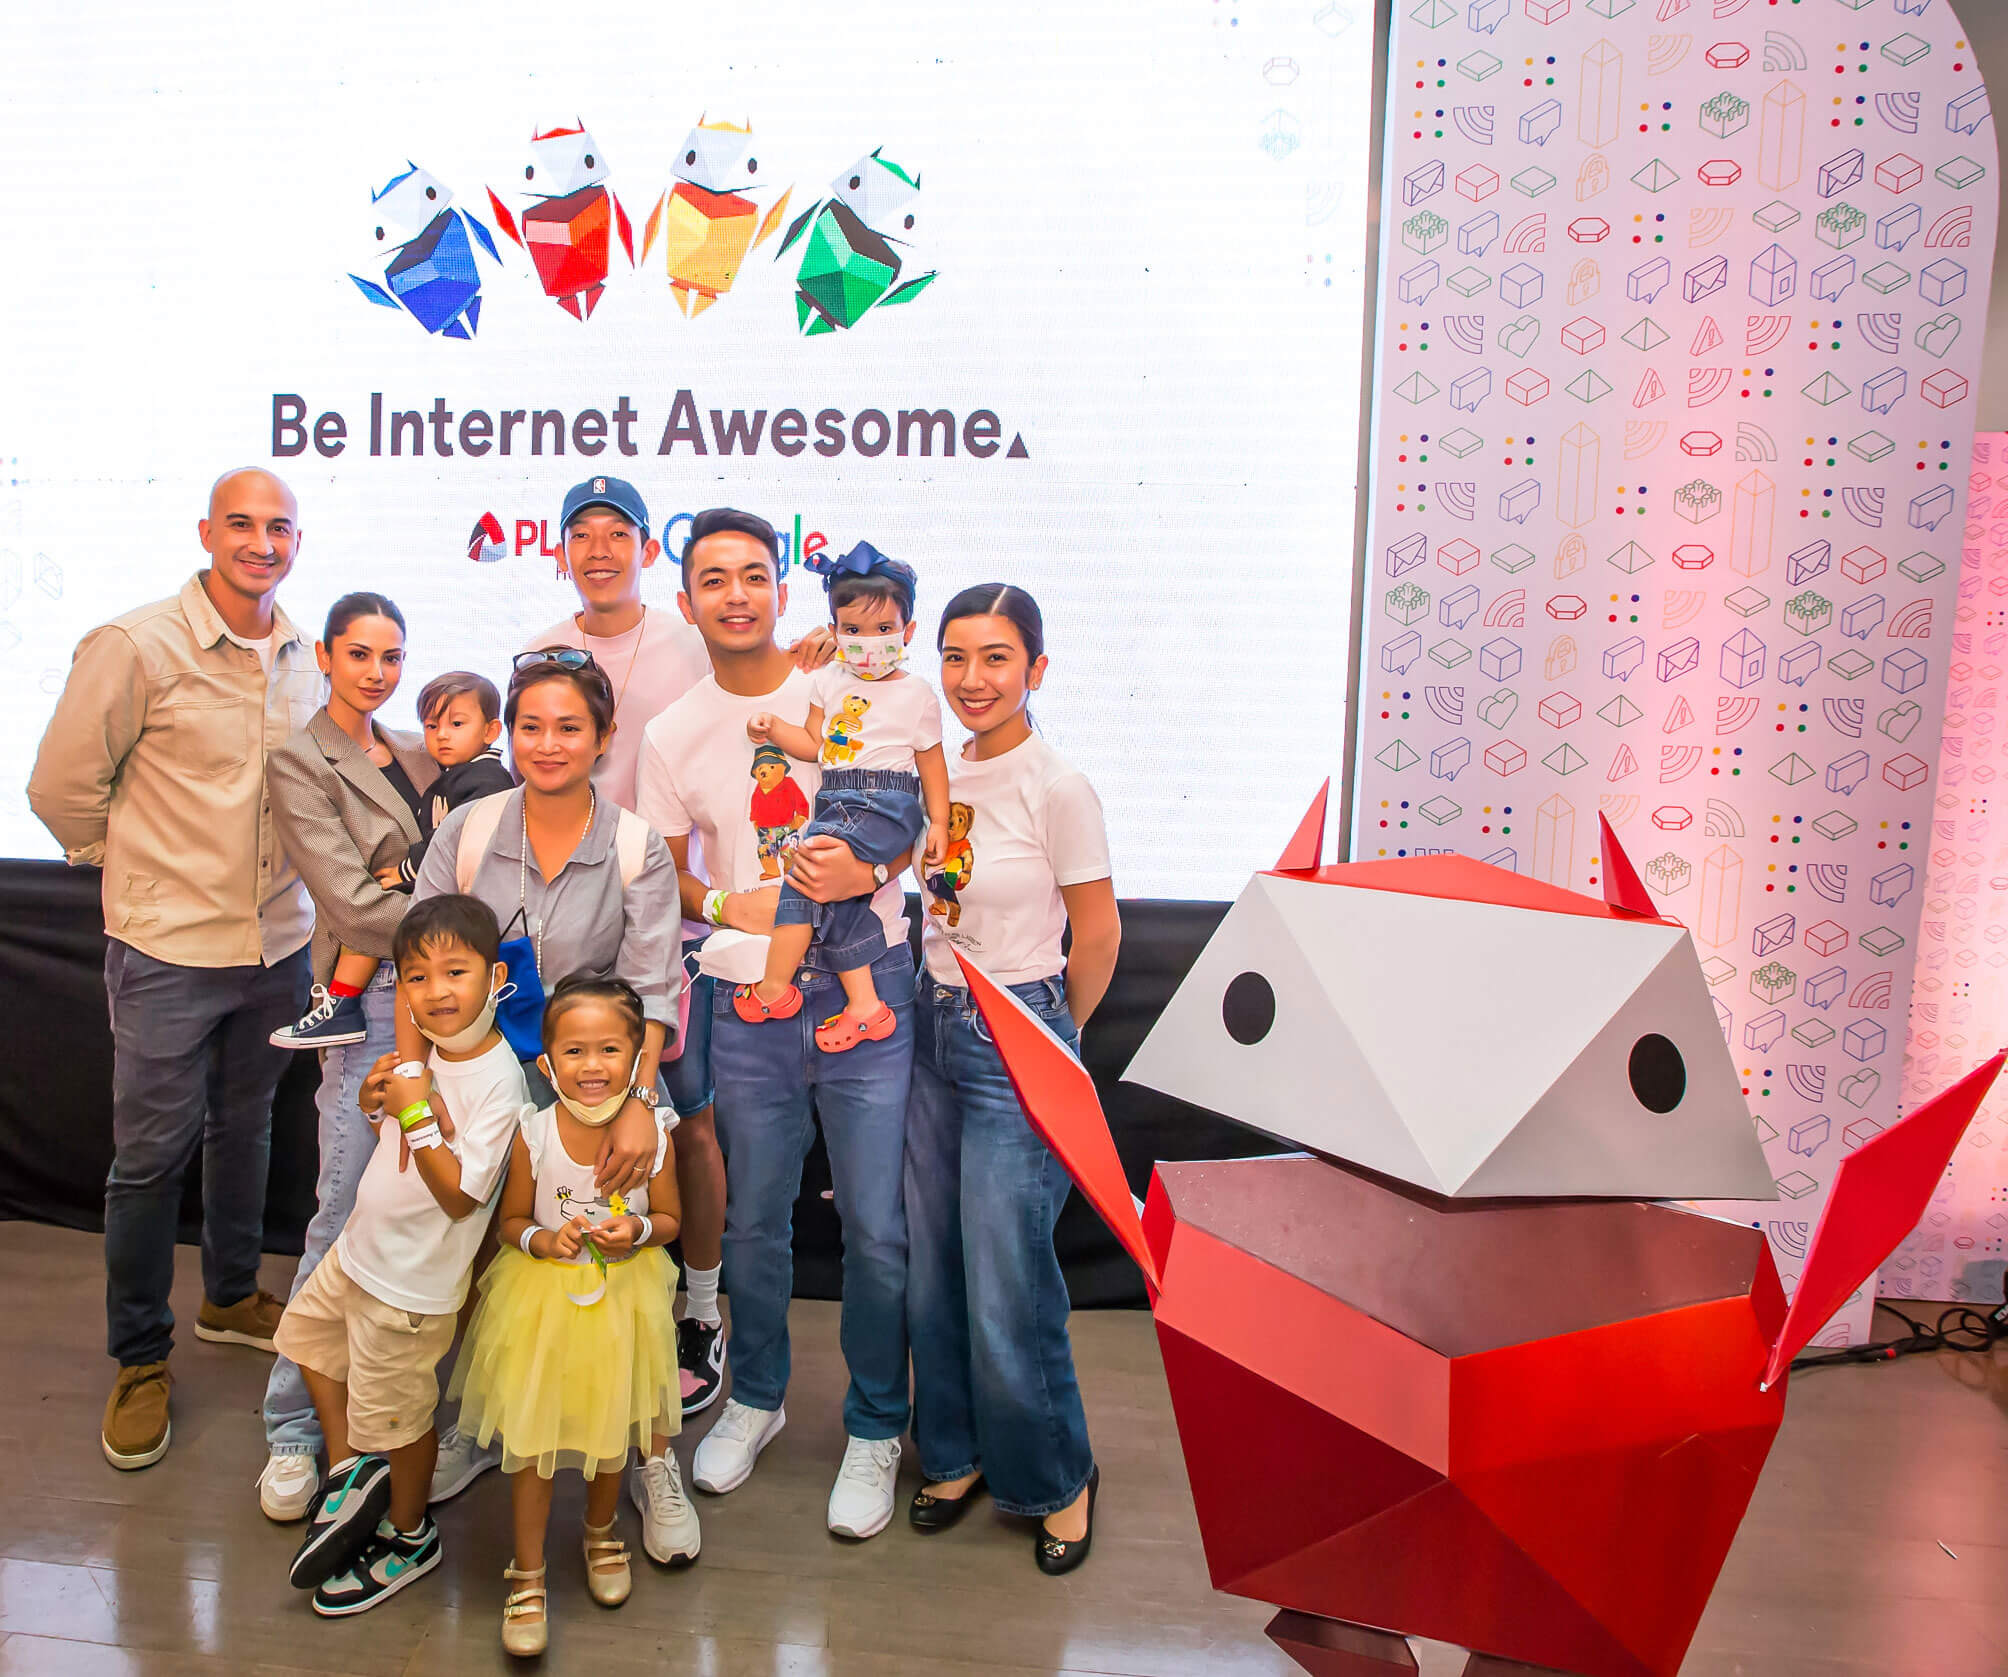 Actor and host KC Montero (left) and family with newscaster, Migs Bustos (3rd from right) and family; and UAAP sportscaster and DJ Riki Flo (3rd from left, front row) and family.